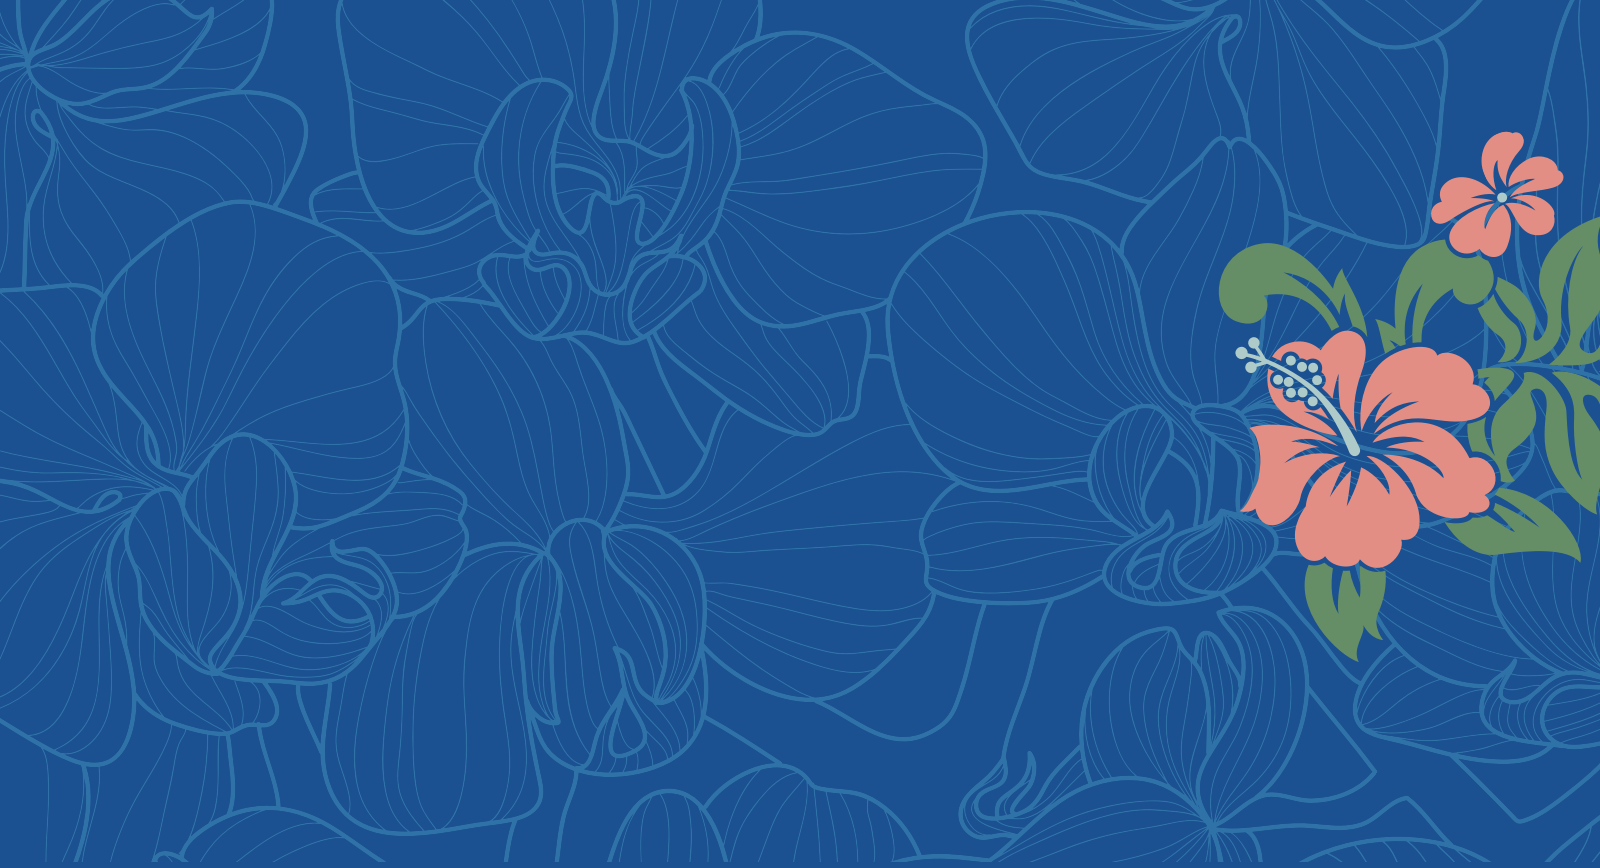 Decorative background illustration of a blue flower pattern and one colored flower